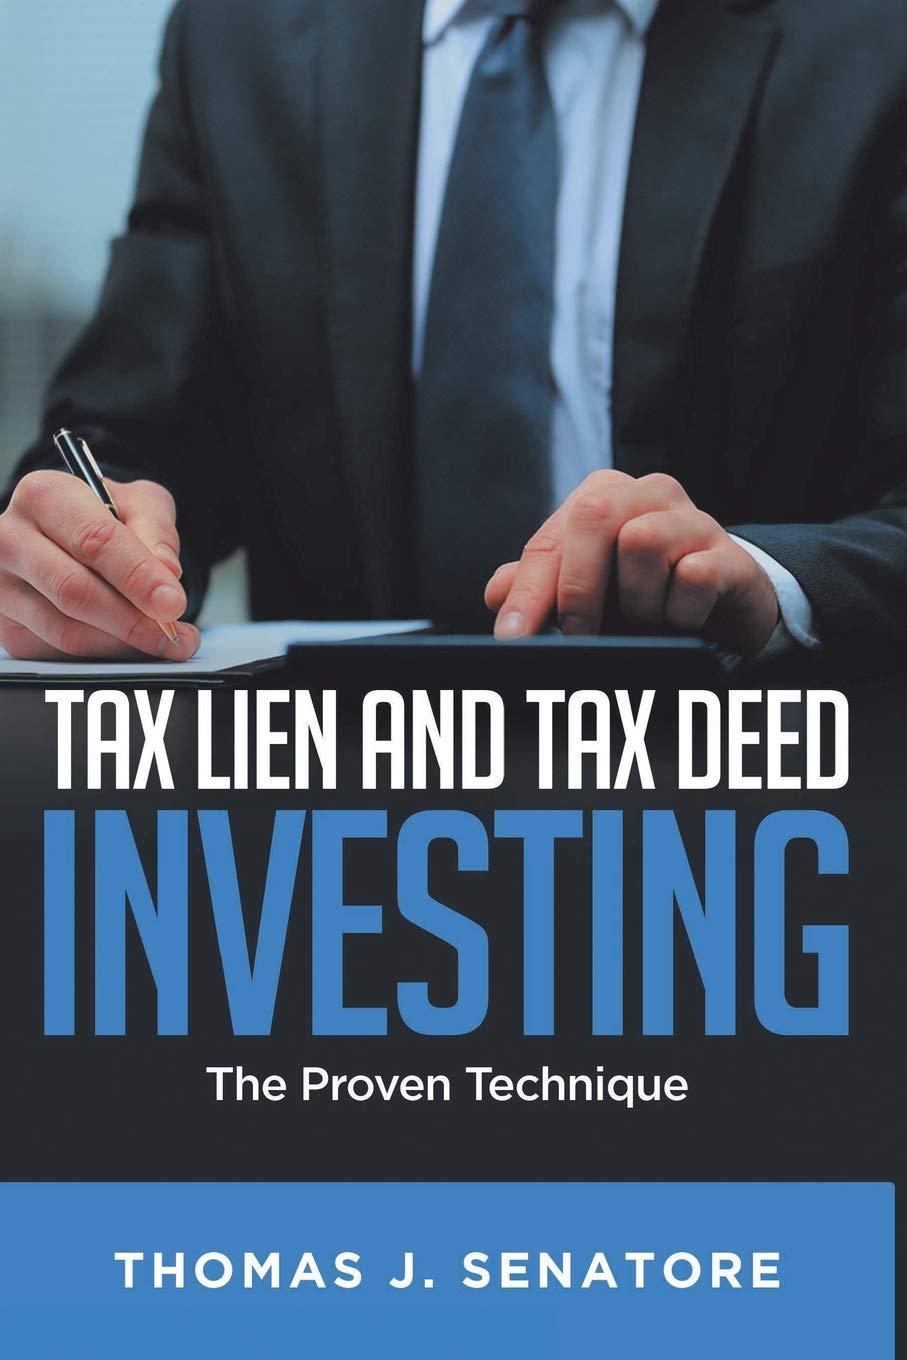  Tax Lien and Tax Deed Investing: The Proven Technique - SureShot Books